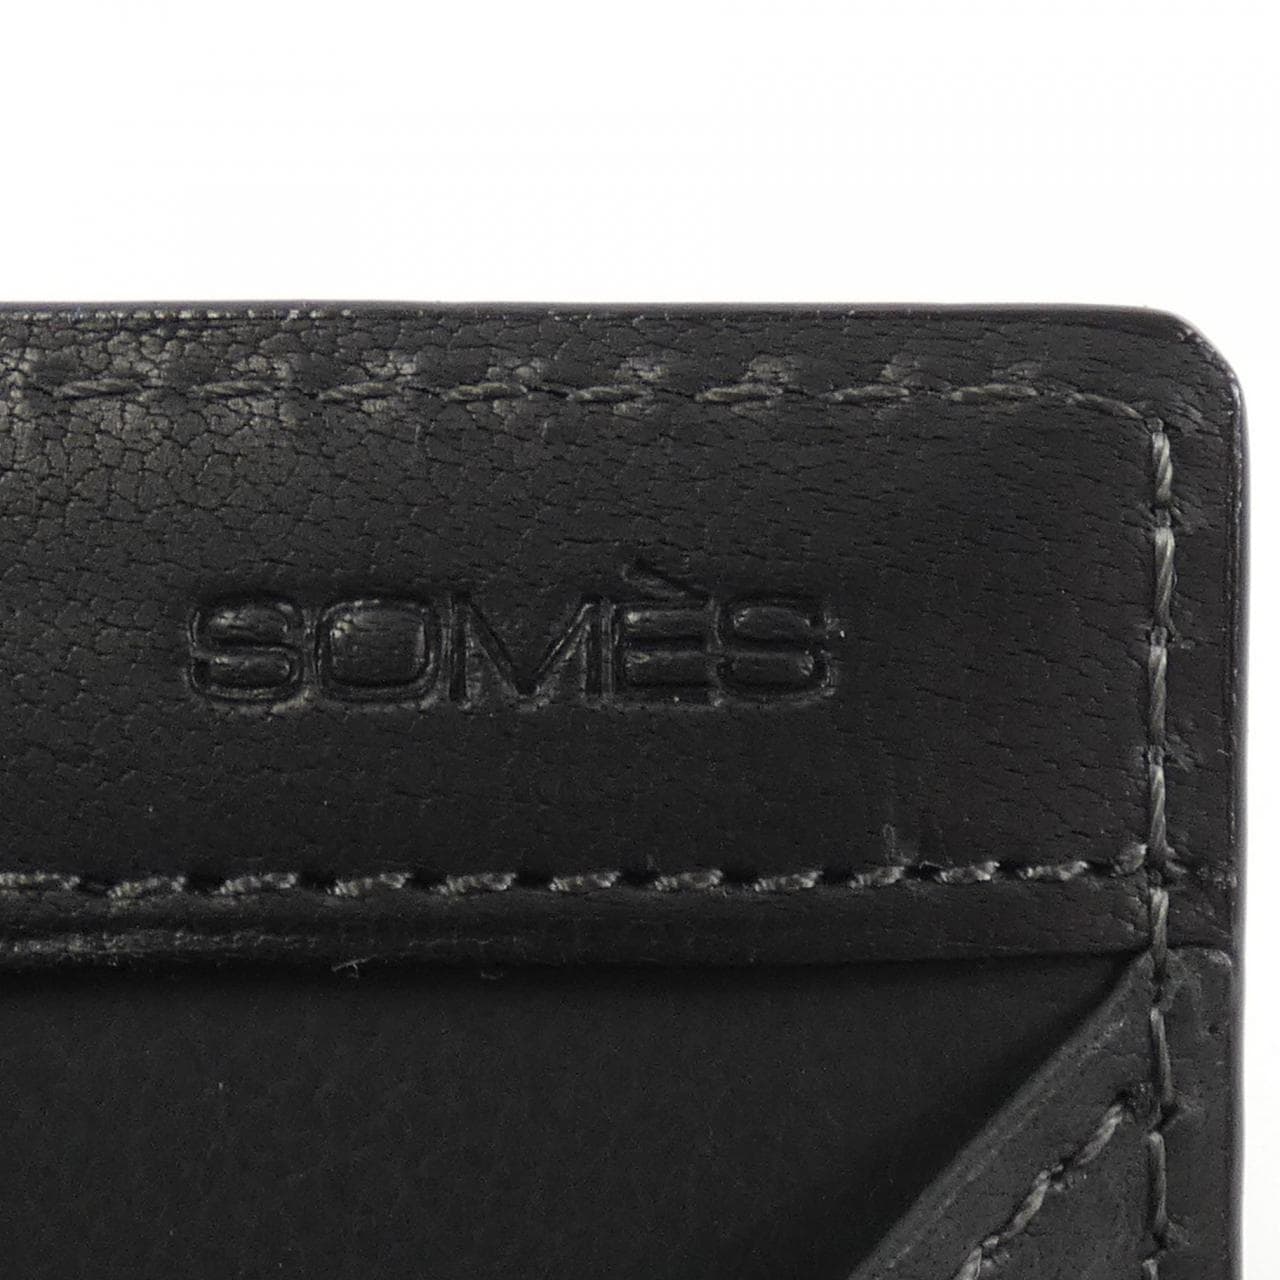 SOMESSADDLE COIN CASE